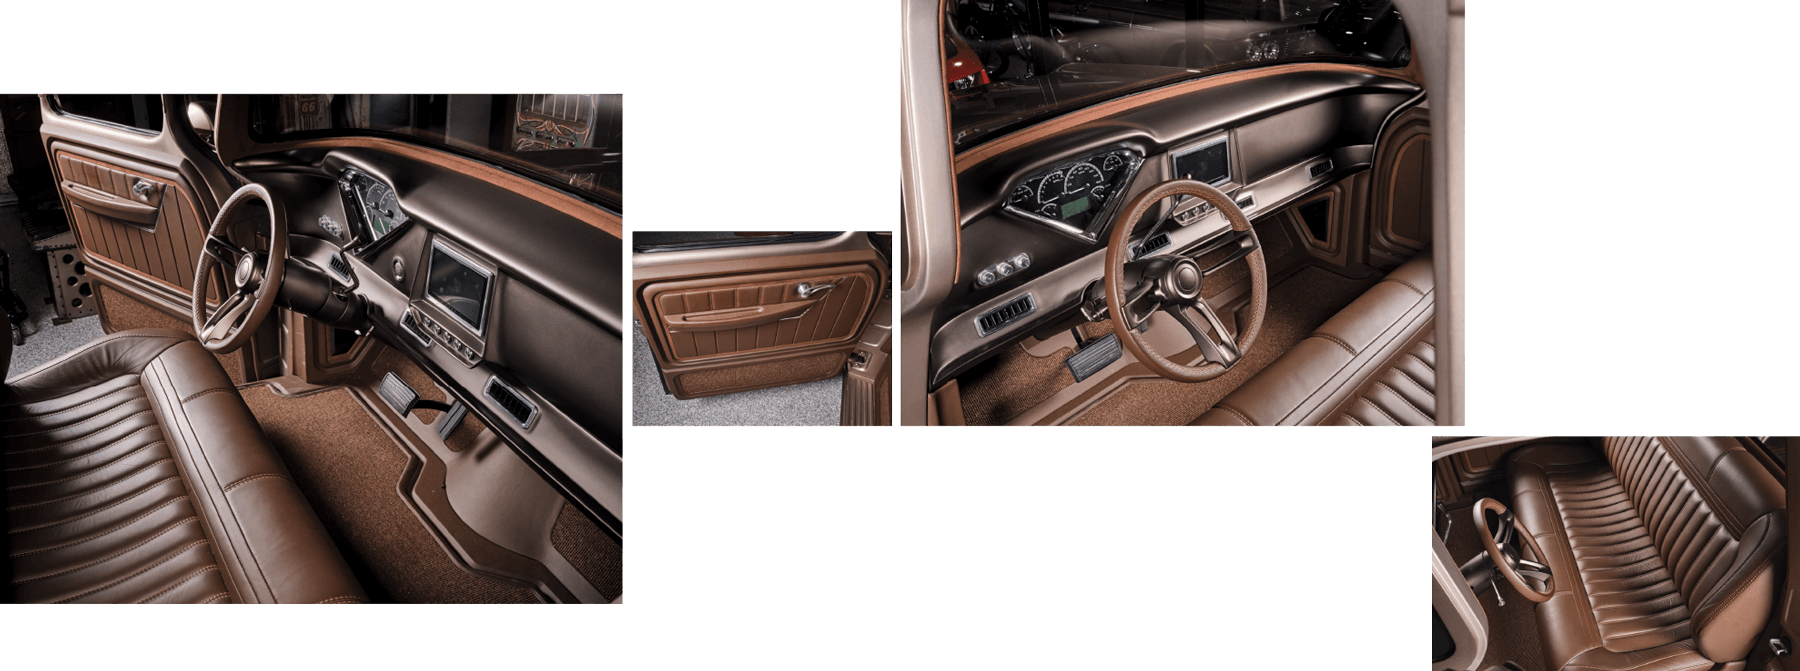 collage of images of a truck interior